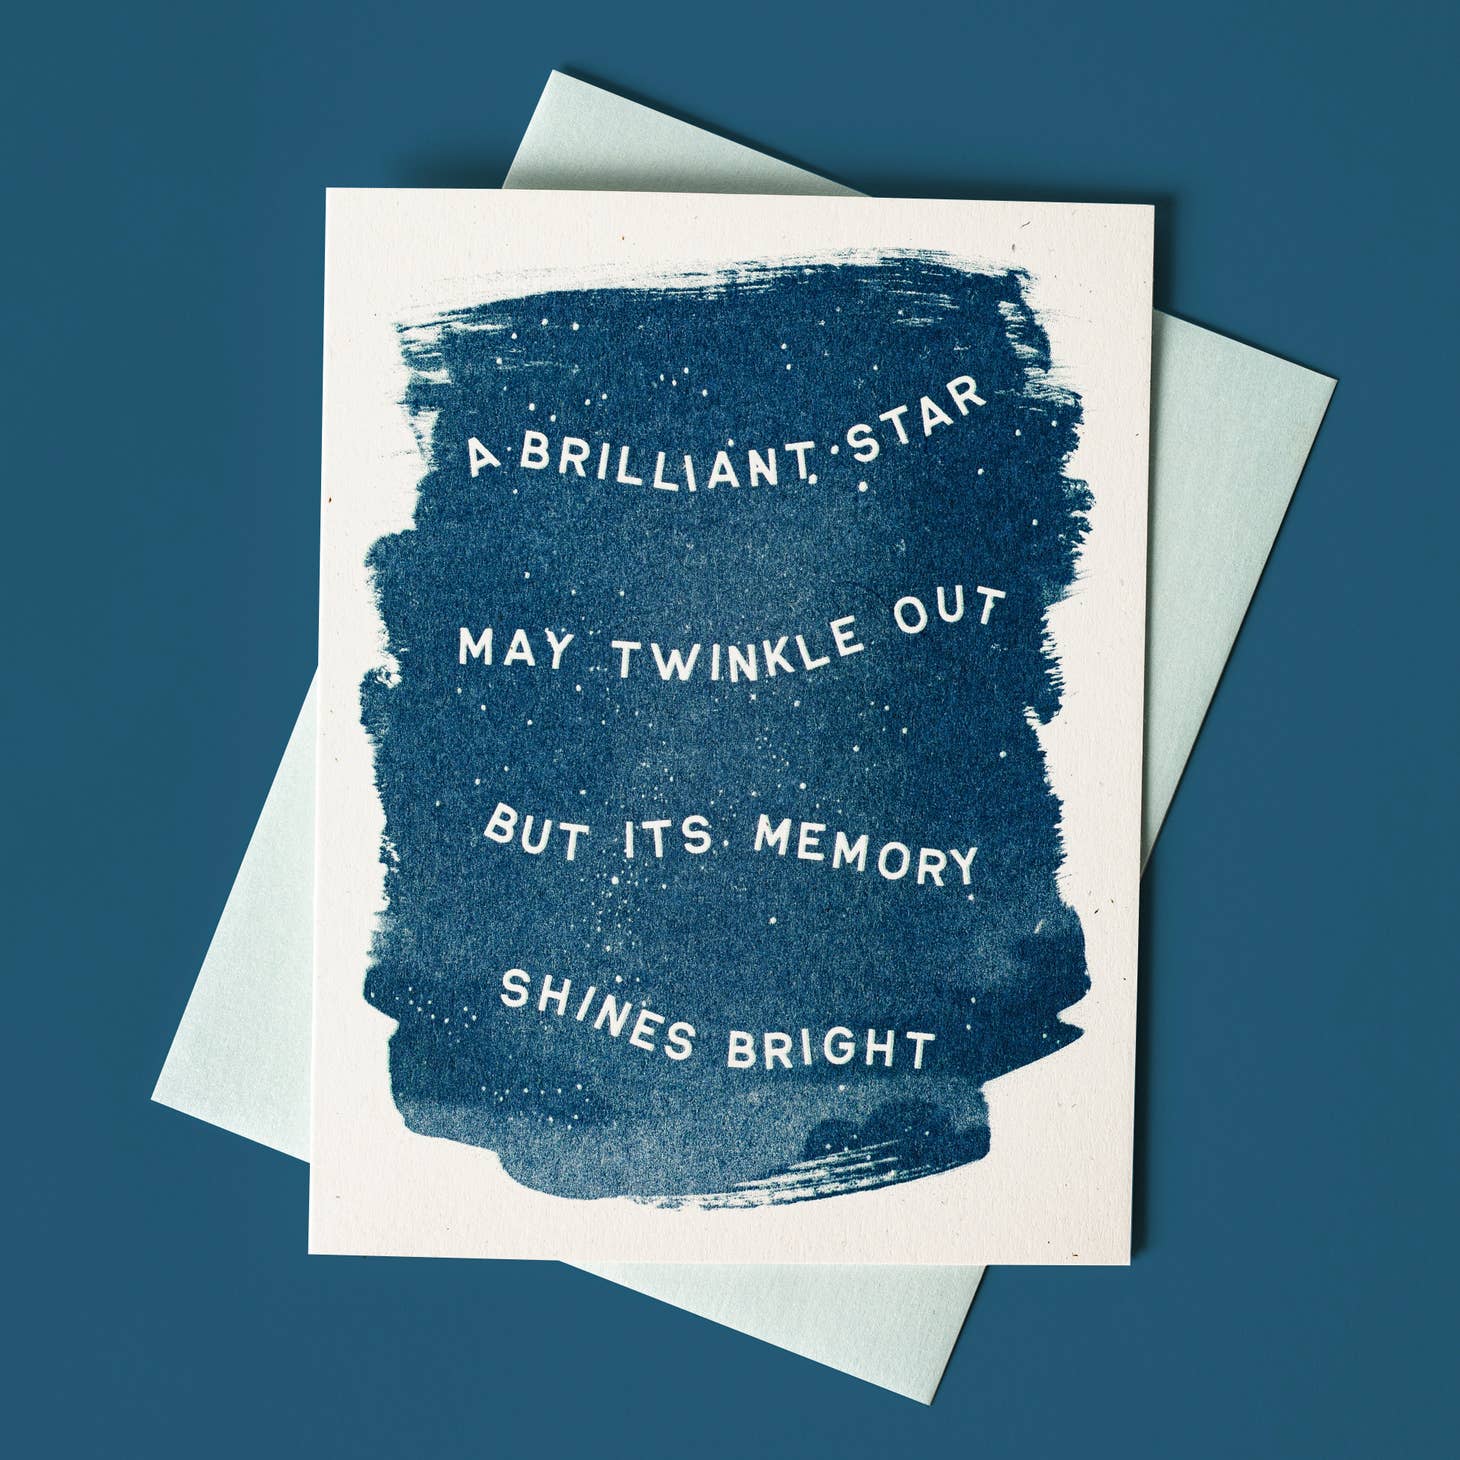 White background with dark blue center and white text says, "A brilliant star may twinkle out but its memory shines bright". Pale blue envelope is included. 